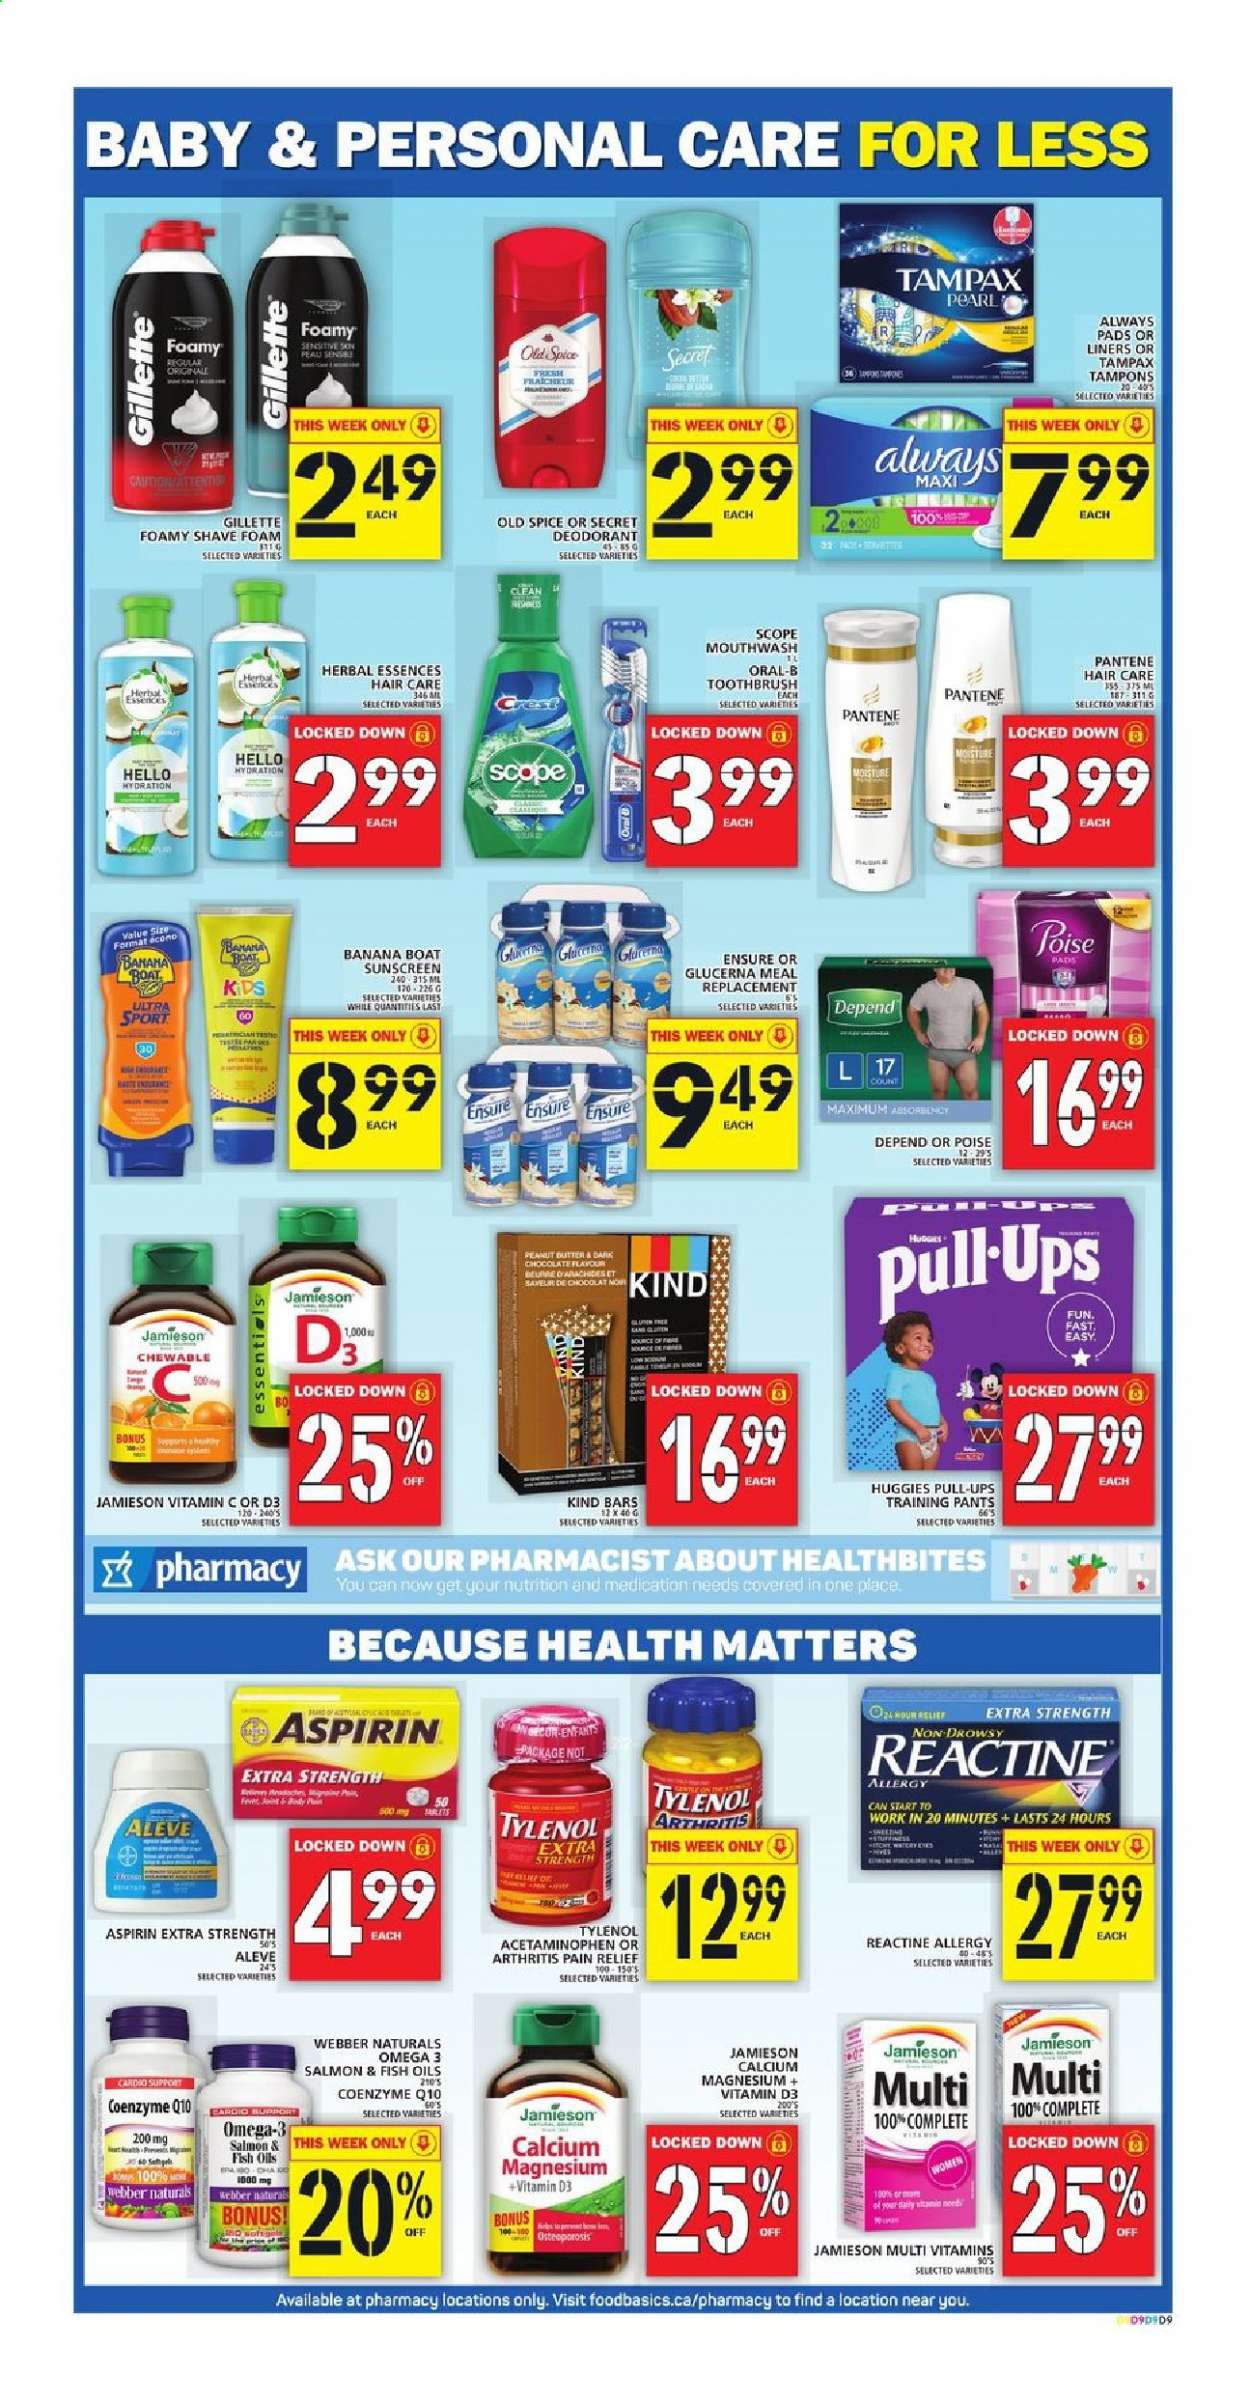 thumbnail - Food Basics Flyer - June 24, 2021 - June 30, 2021 - Sales products - salmon, fish, chocolate, dark chocolate, spice, pants, baby pants, toothbrush, mouthwash, Always pads, tampons, Herbal Essences, anti-perspirant, pain relief, Aleve, magnesium, Tylenol, vitamin c, Omega-3, Glucerna, vitamin D3, aspirin, Gillette, Tampax, Huggies, Pantene, Old Spice, Oral-B, deodorant. Page 11.